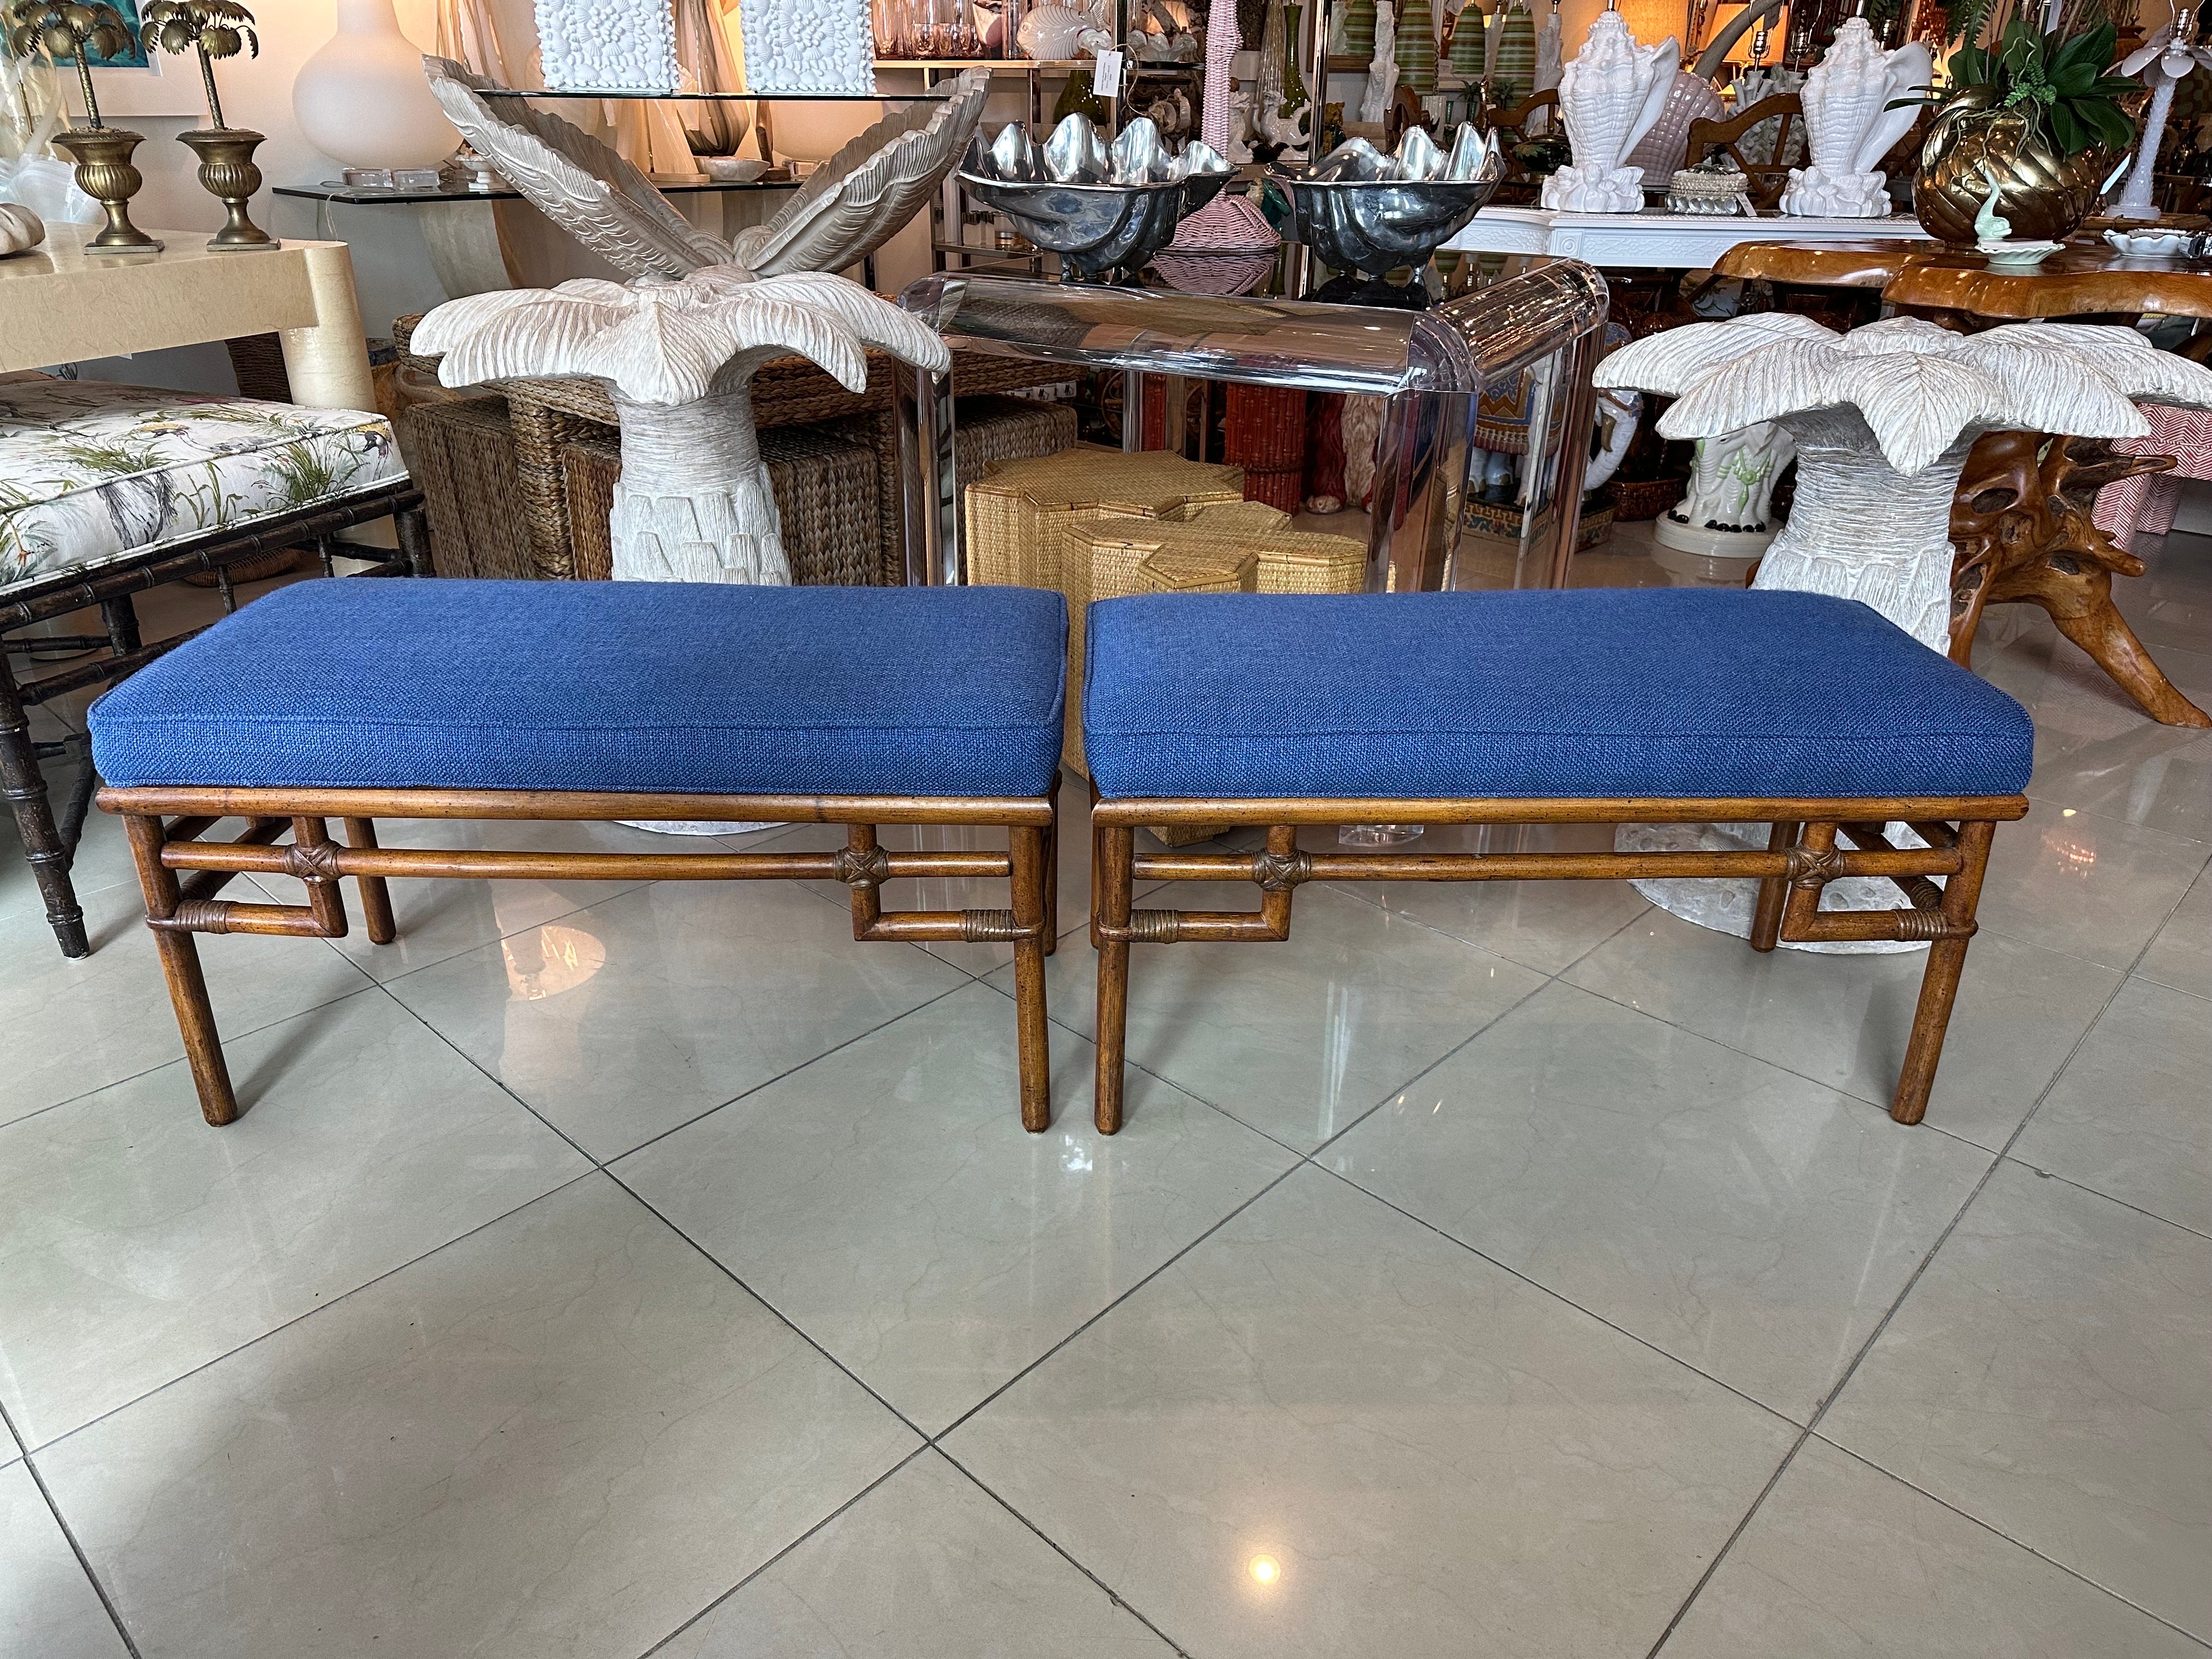 Vintage pair of rattan, bamboo end of bed benches. Made by Ficks Reed. Original upholstery has been cleaned but may show minor wear. Dimensions: 18.5 H x 35 L x 16 D. 